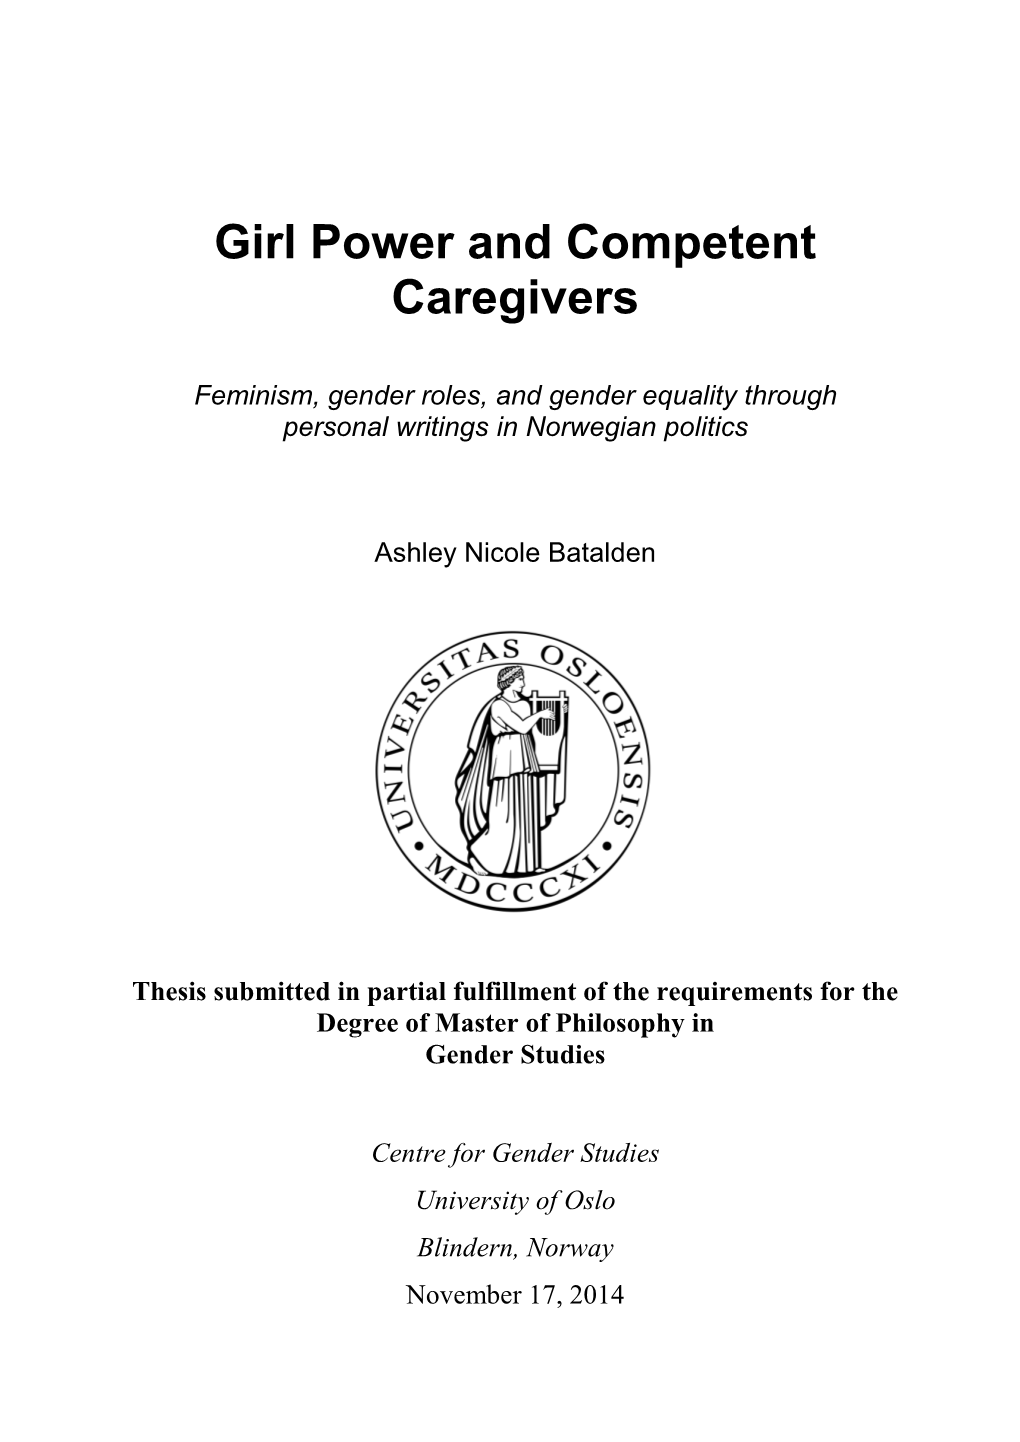 Girl Power and Competent Caregivers